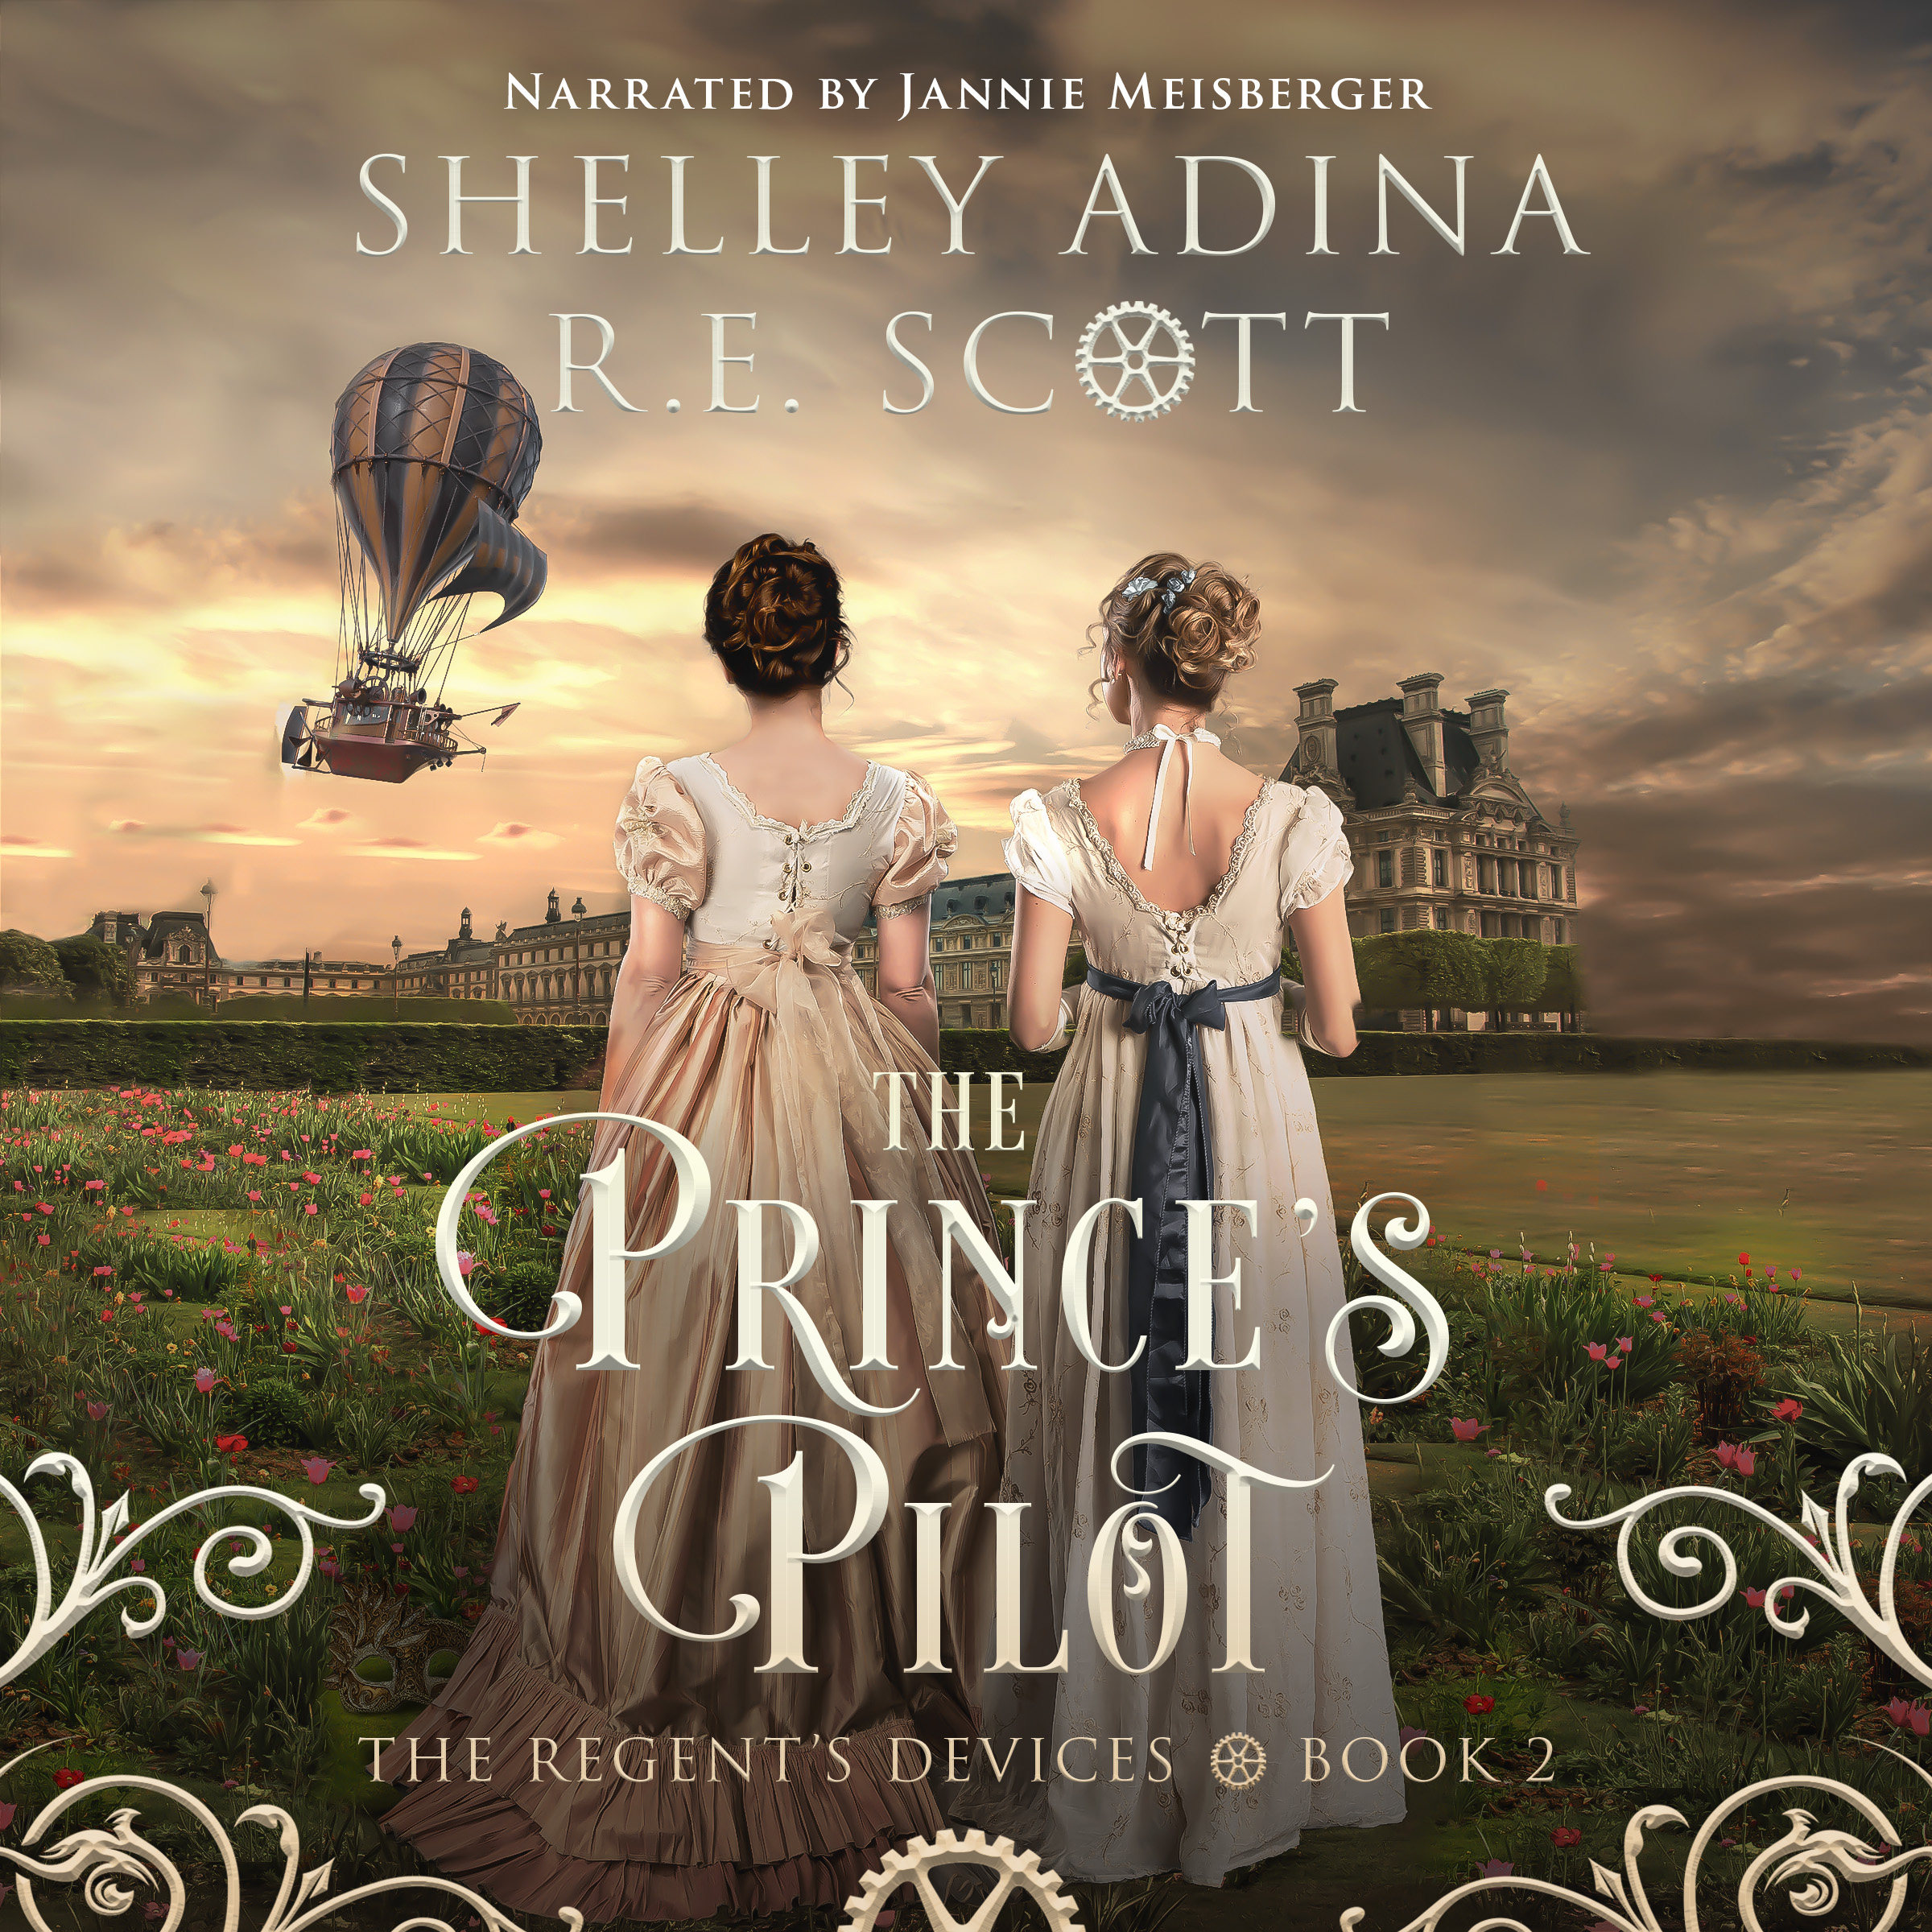 audio book for The Prince's Pilot, book 2 in the Regent's Devices series by Shelley Adina and R.E. Scott